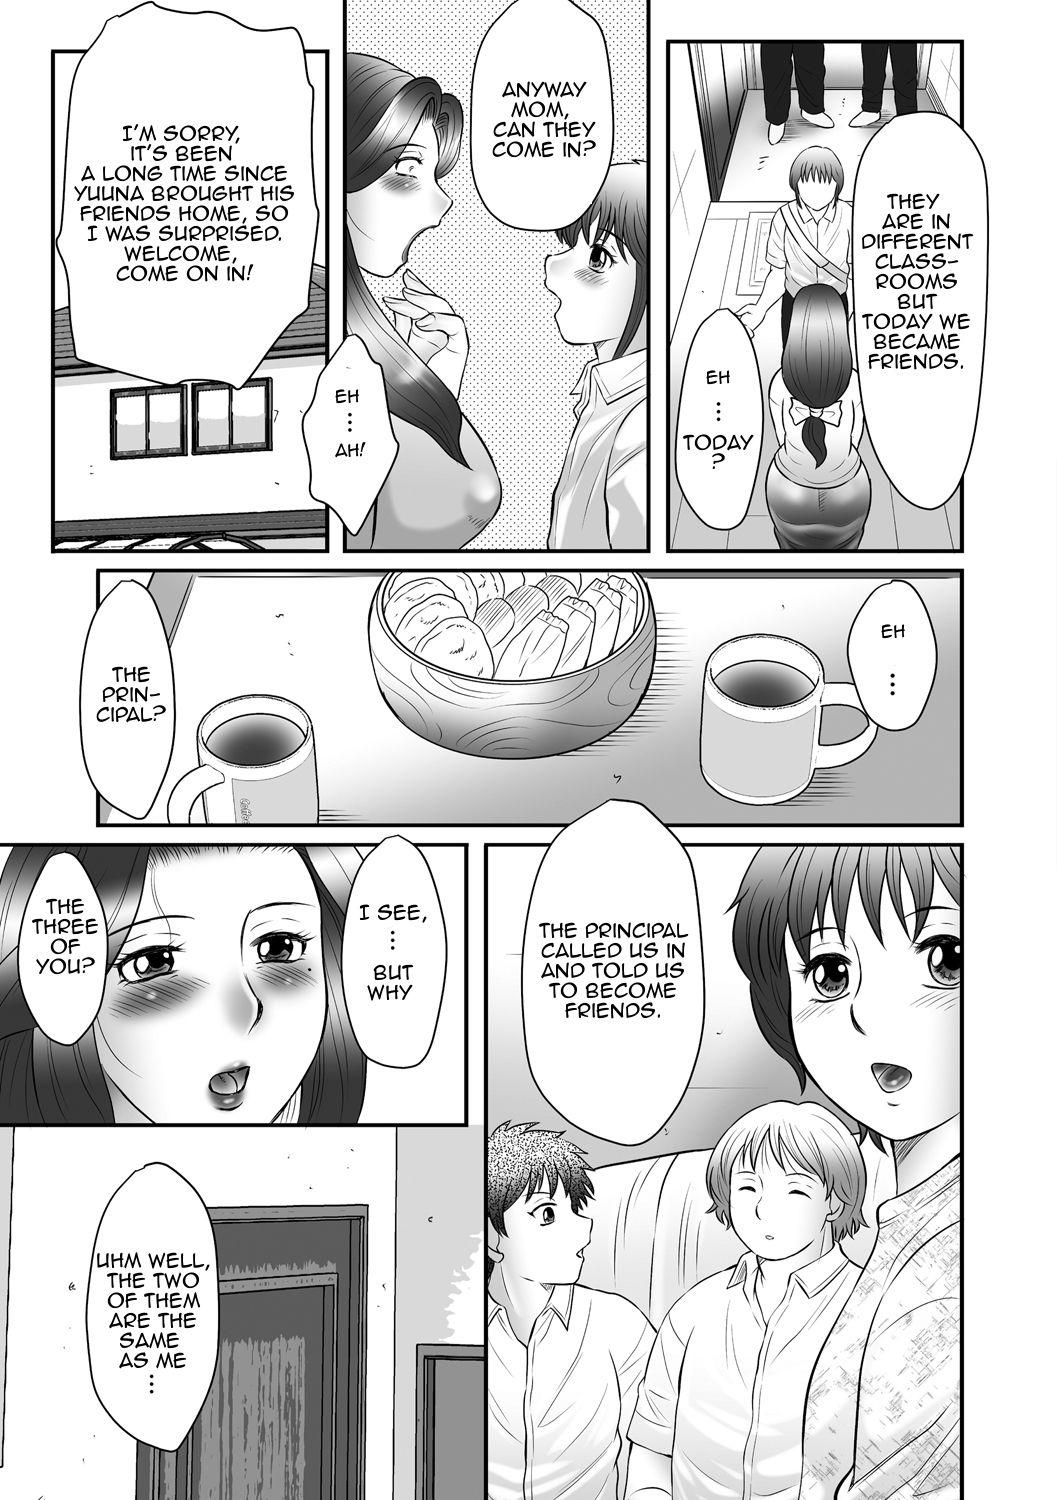 Boshi no Susume - The advice of the mother and child Ch. 1 18